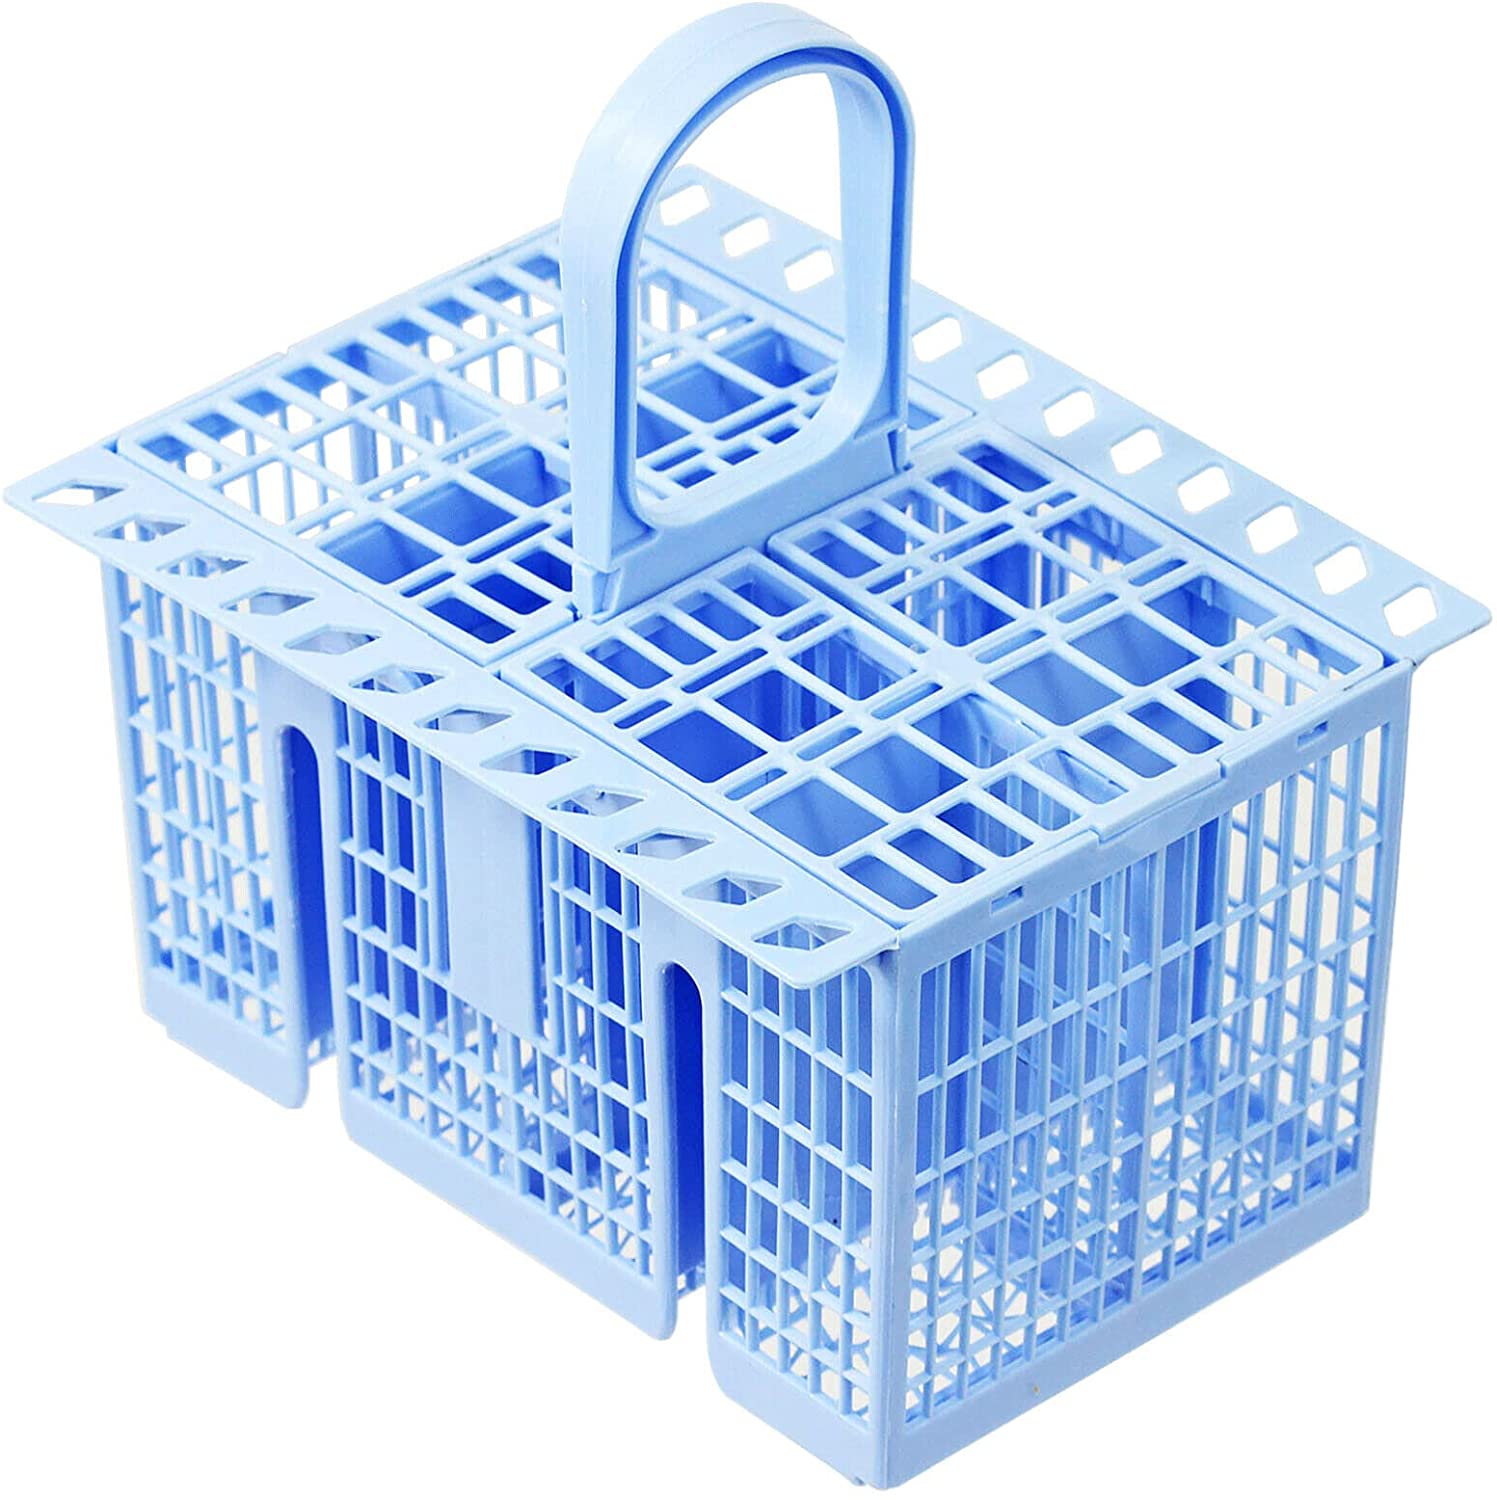 SPARES2GO Cutlery Basket compatible with Grundig Dishwasher (Blue, 220 x 208 x 160mm)